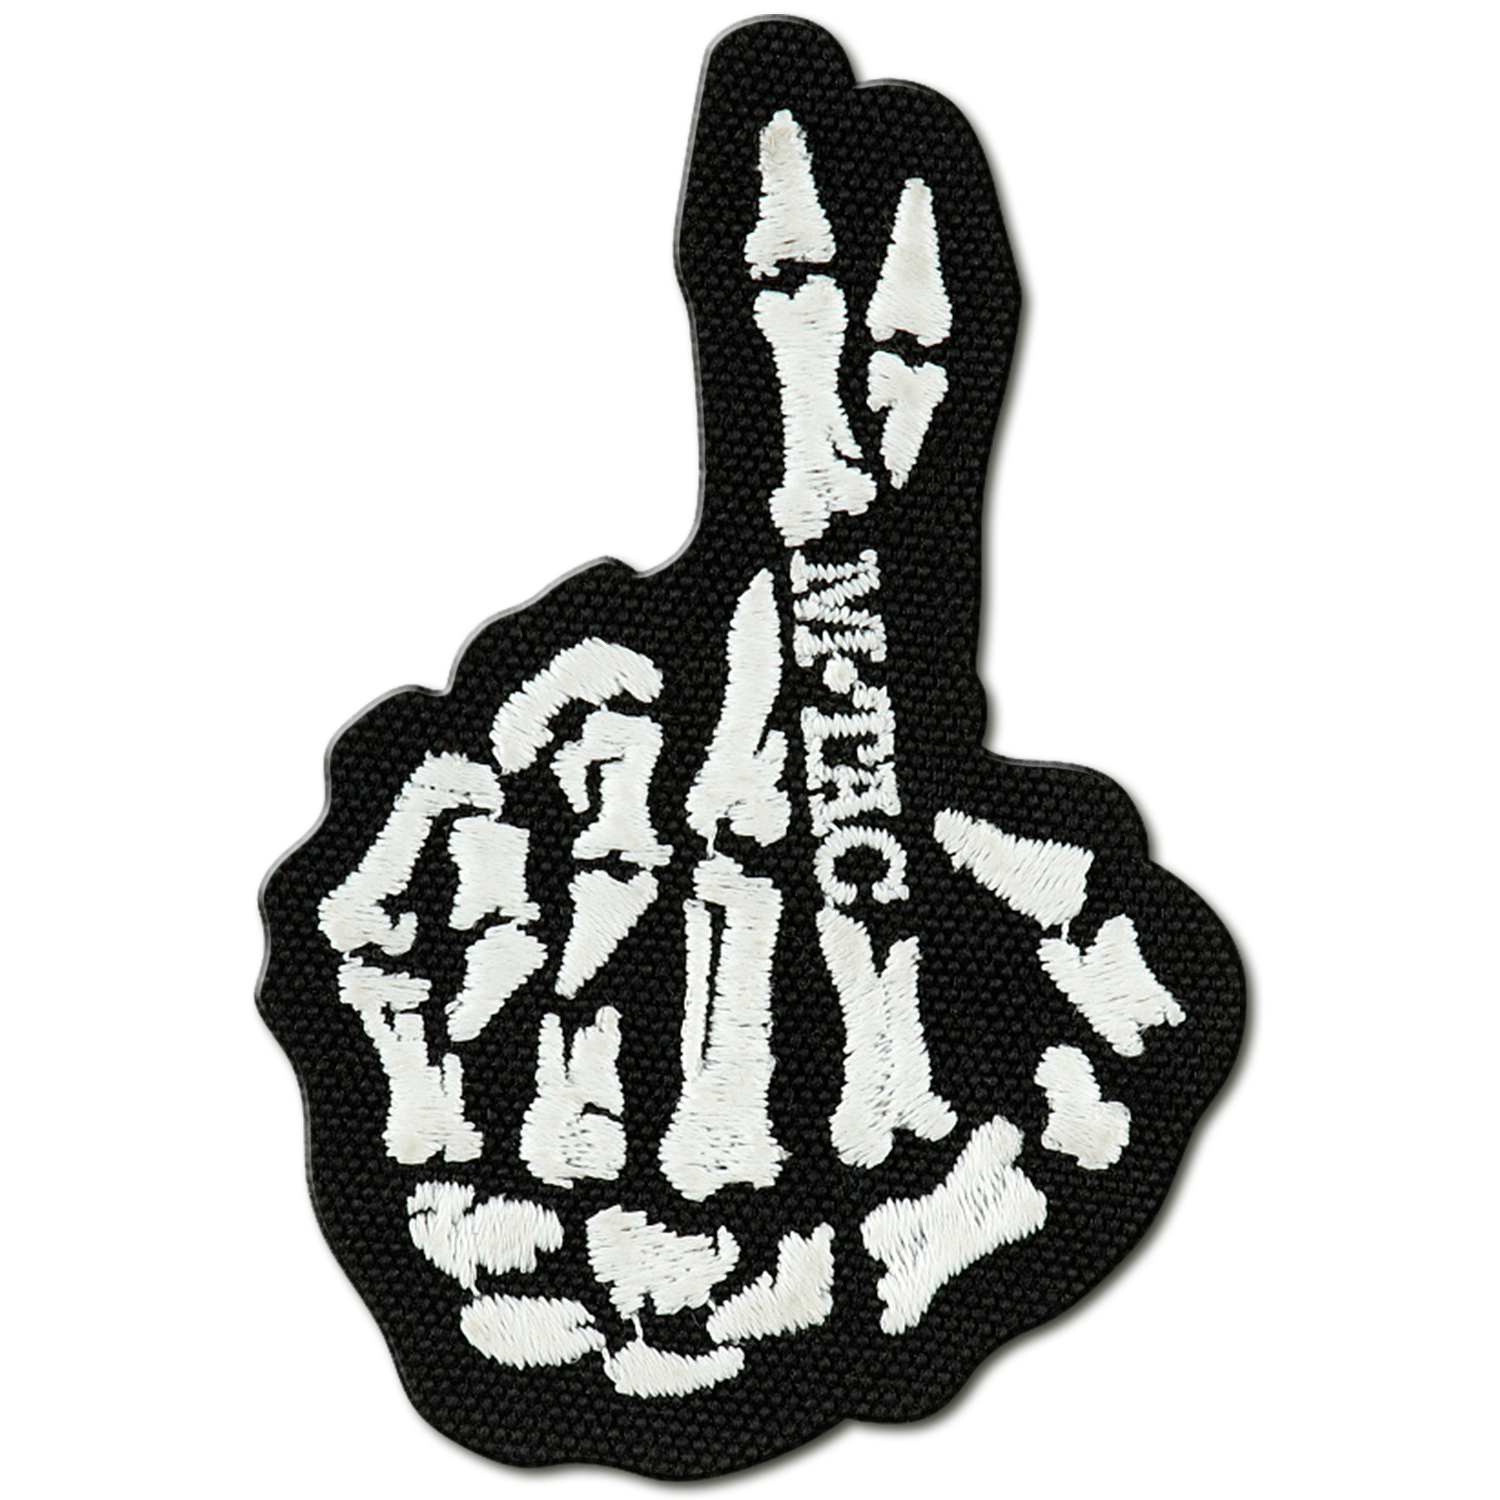 M-Tac GITD Patch Crossed Fingers (Embroidered) Black